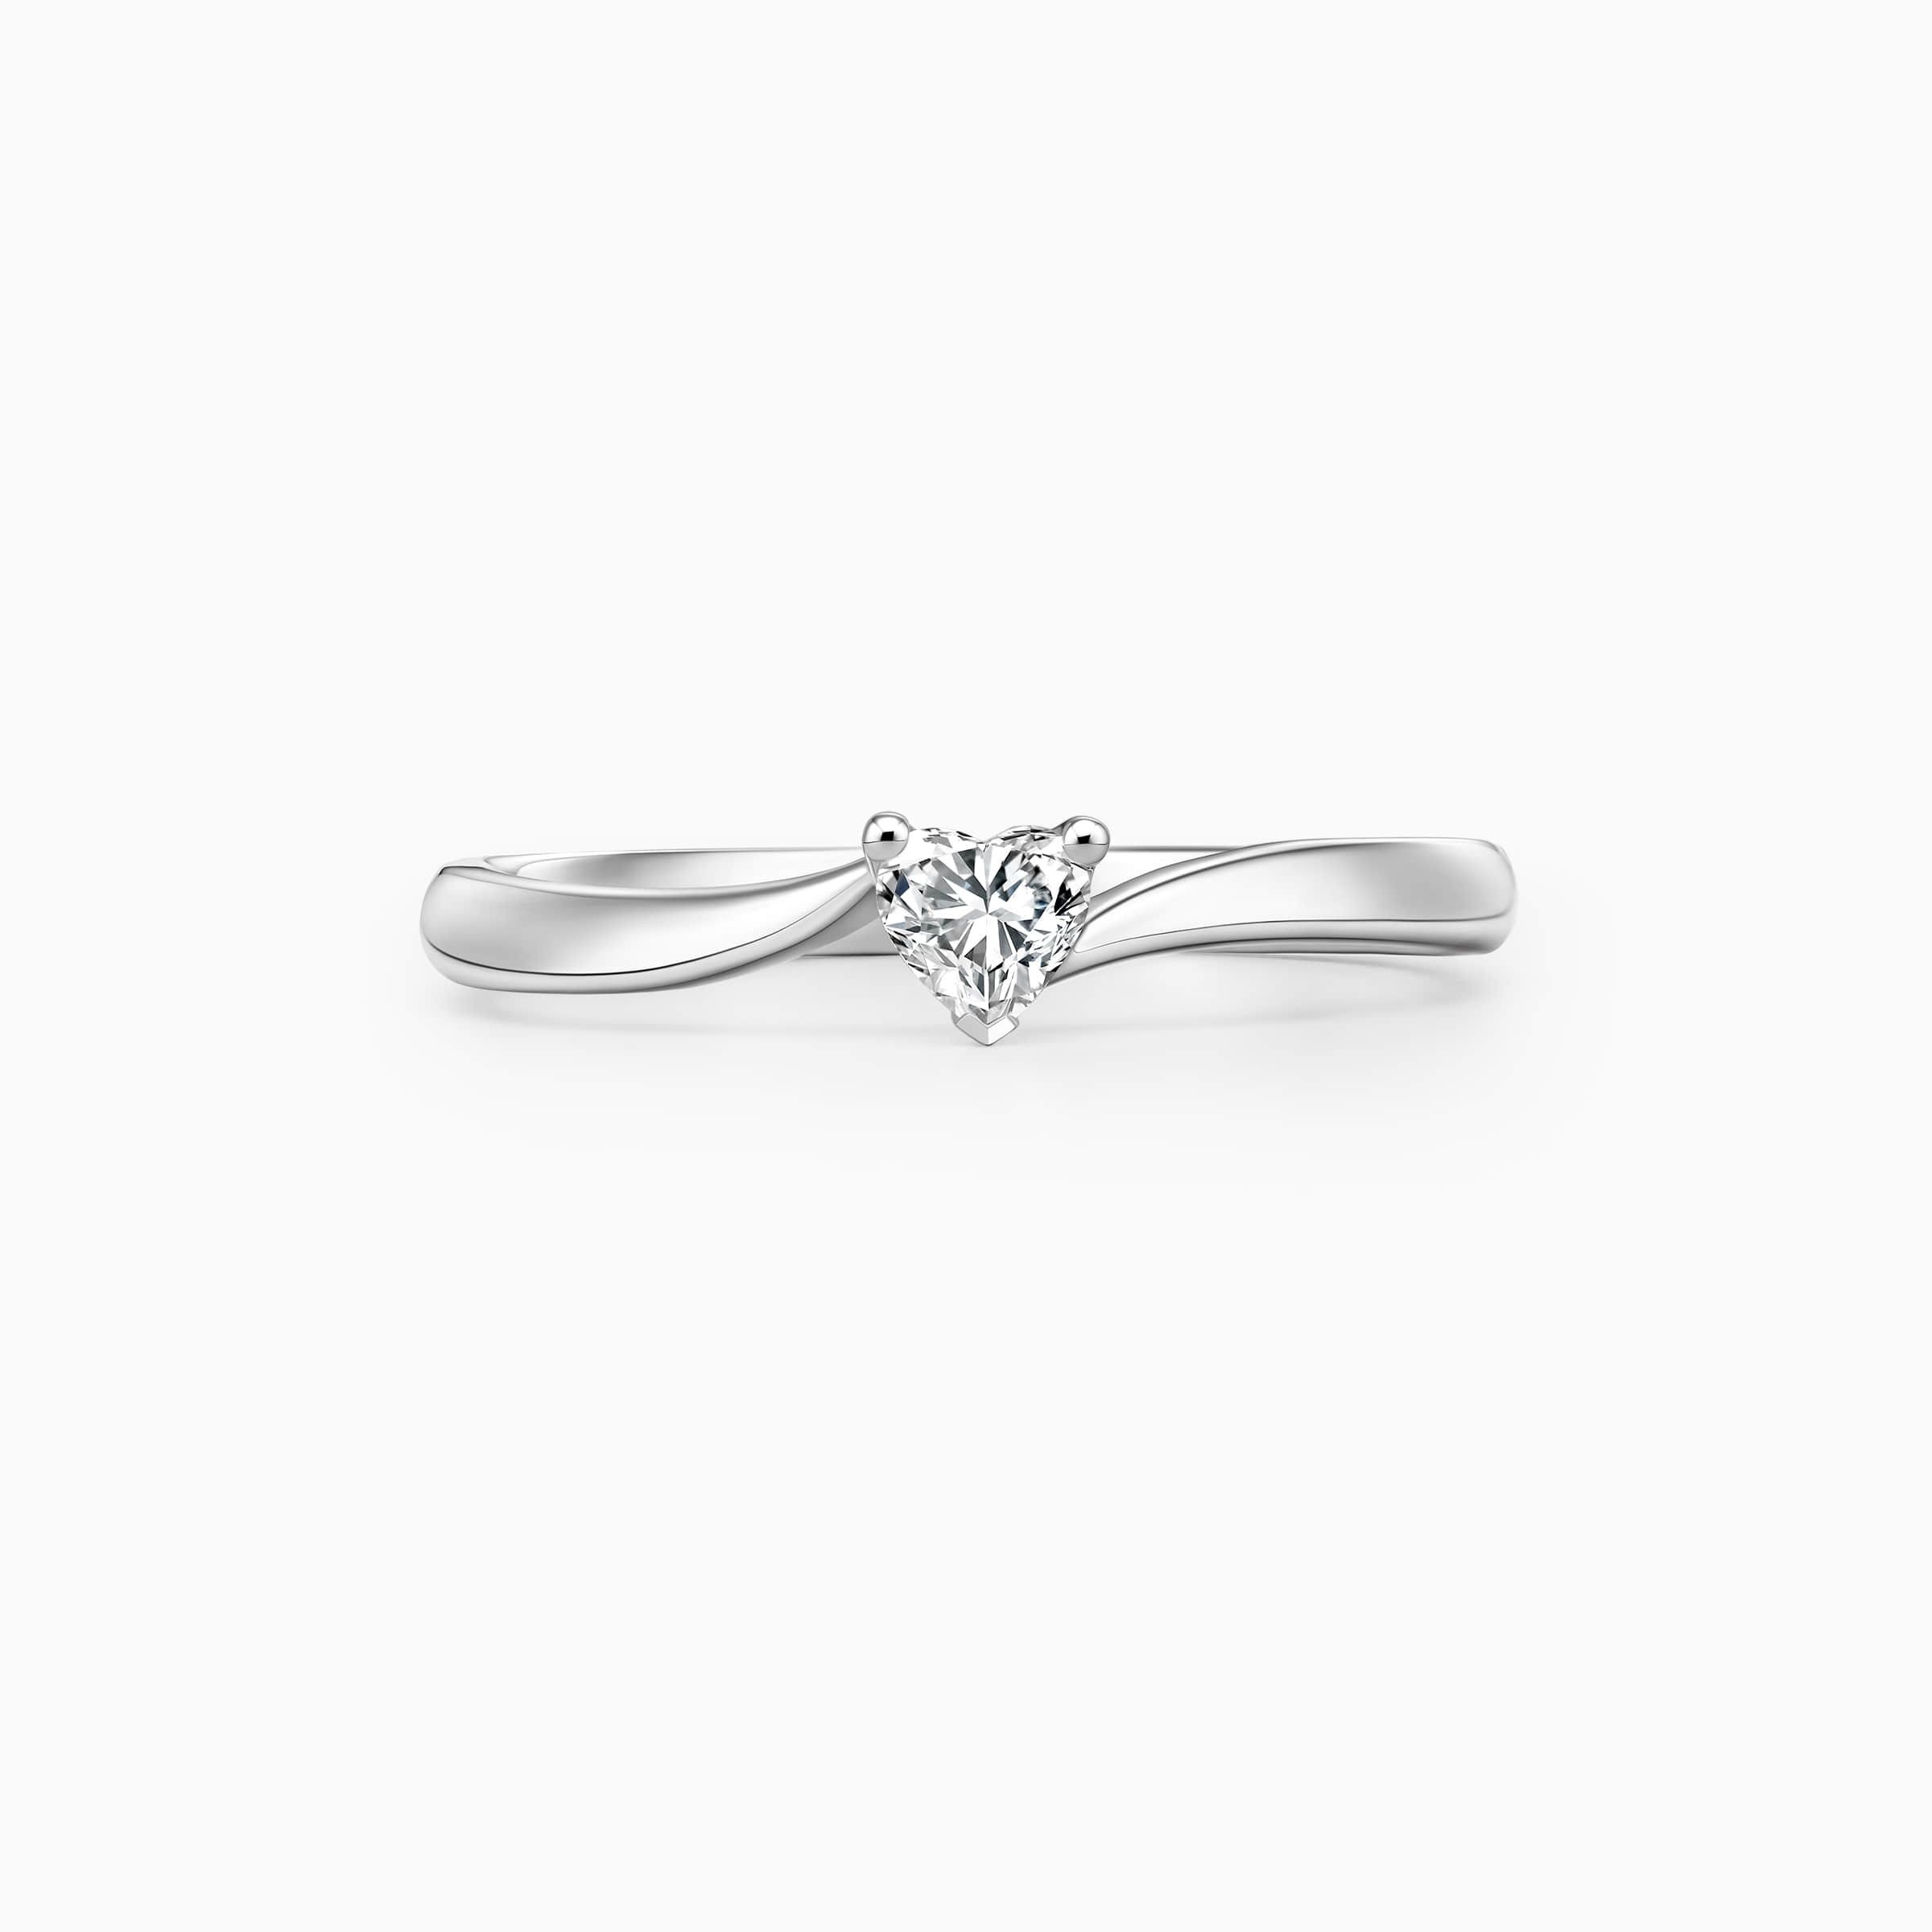 Darry Ring heart shaped engagement rings